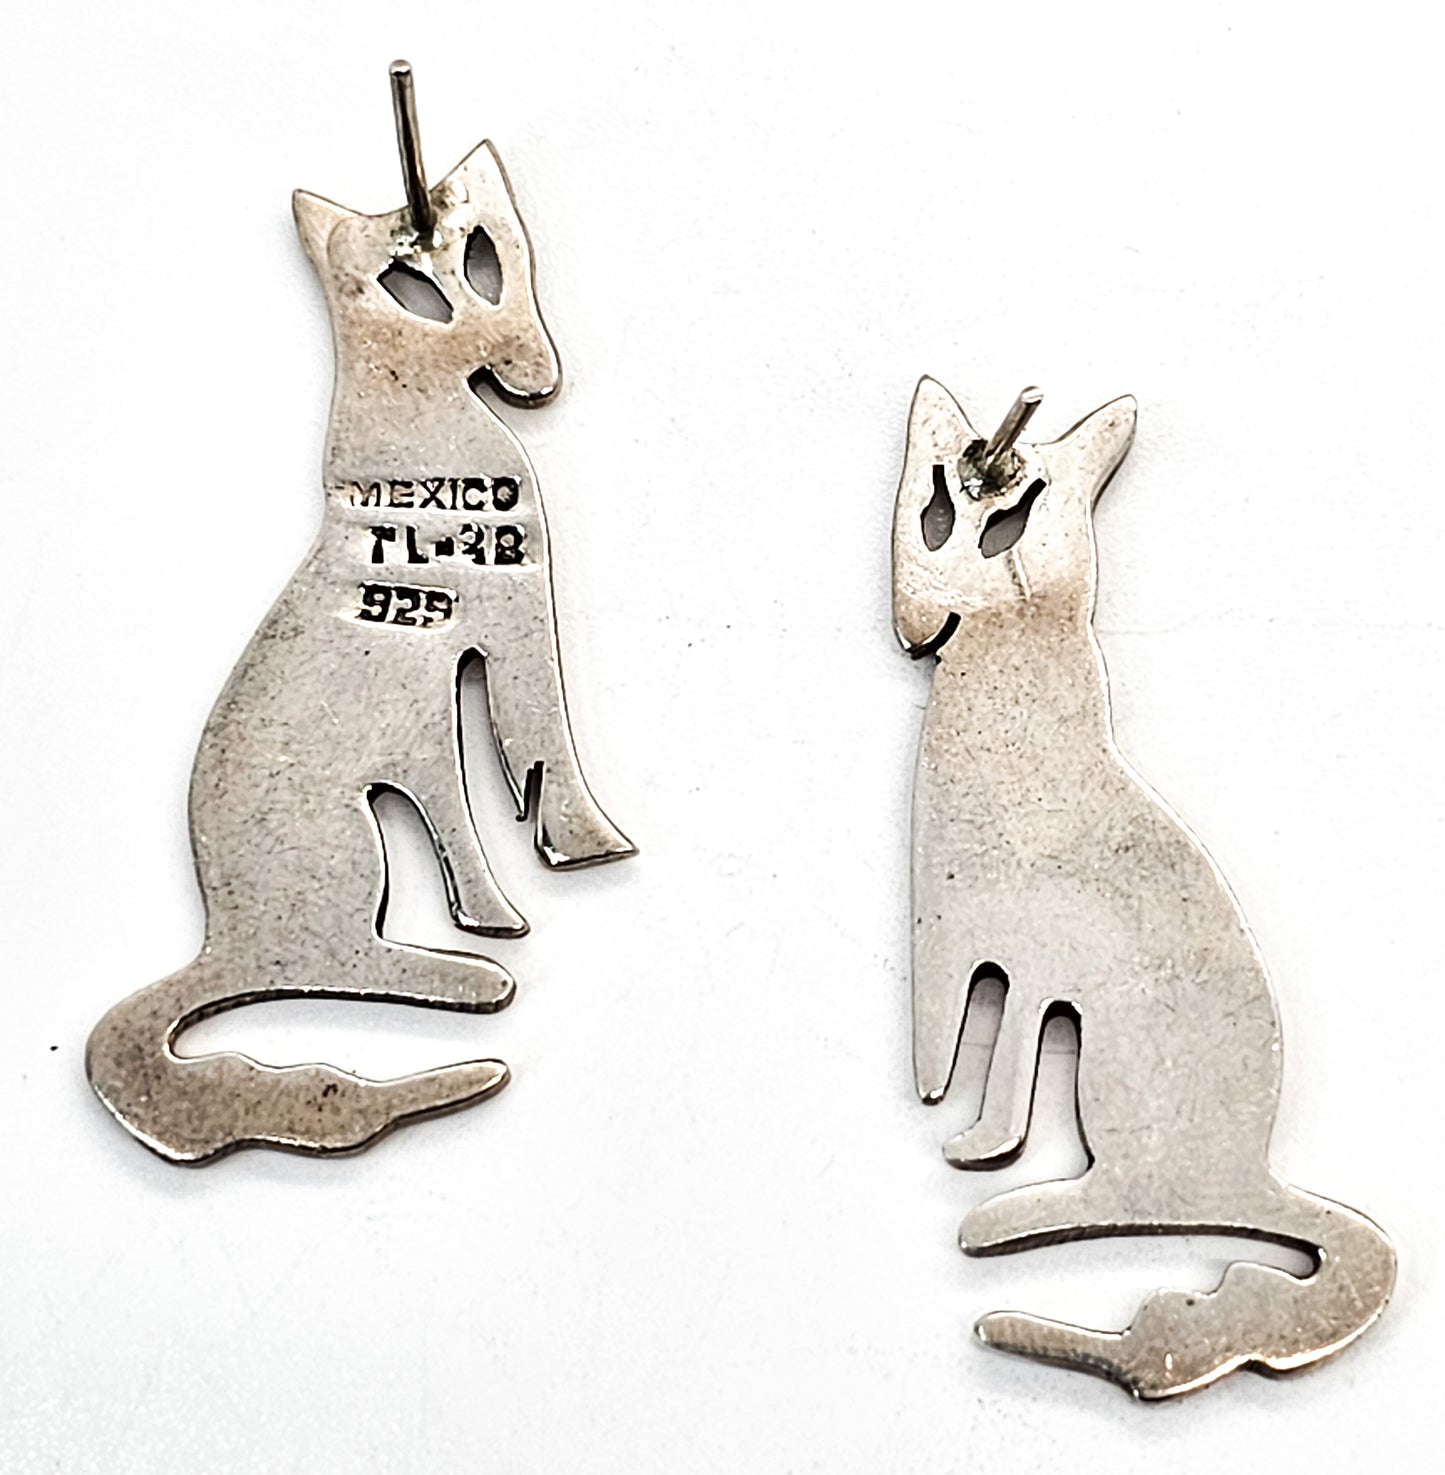 Silver Fox Taxco Mexico vintage sterling silver earrings TR-28